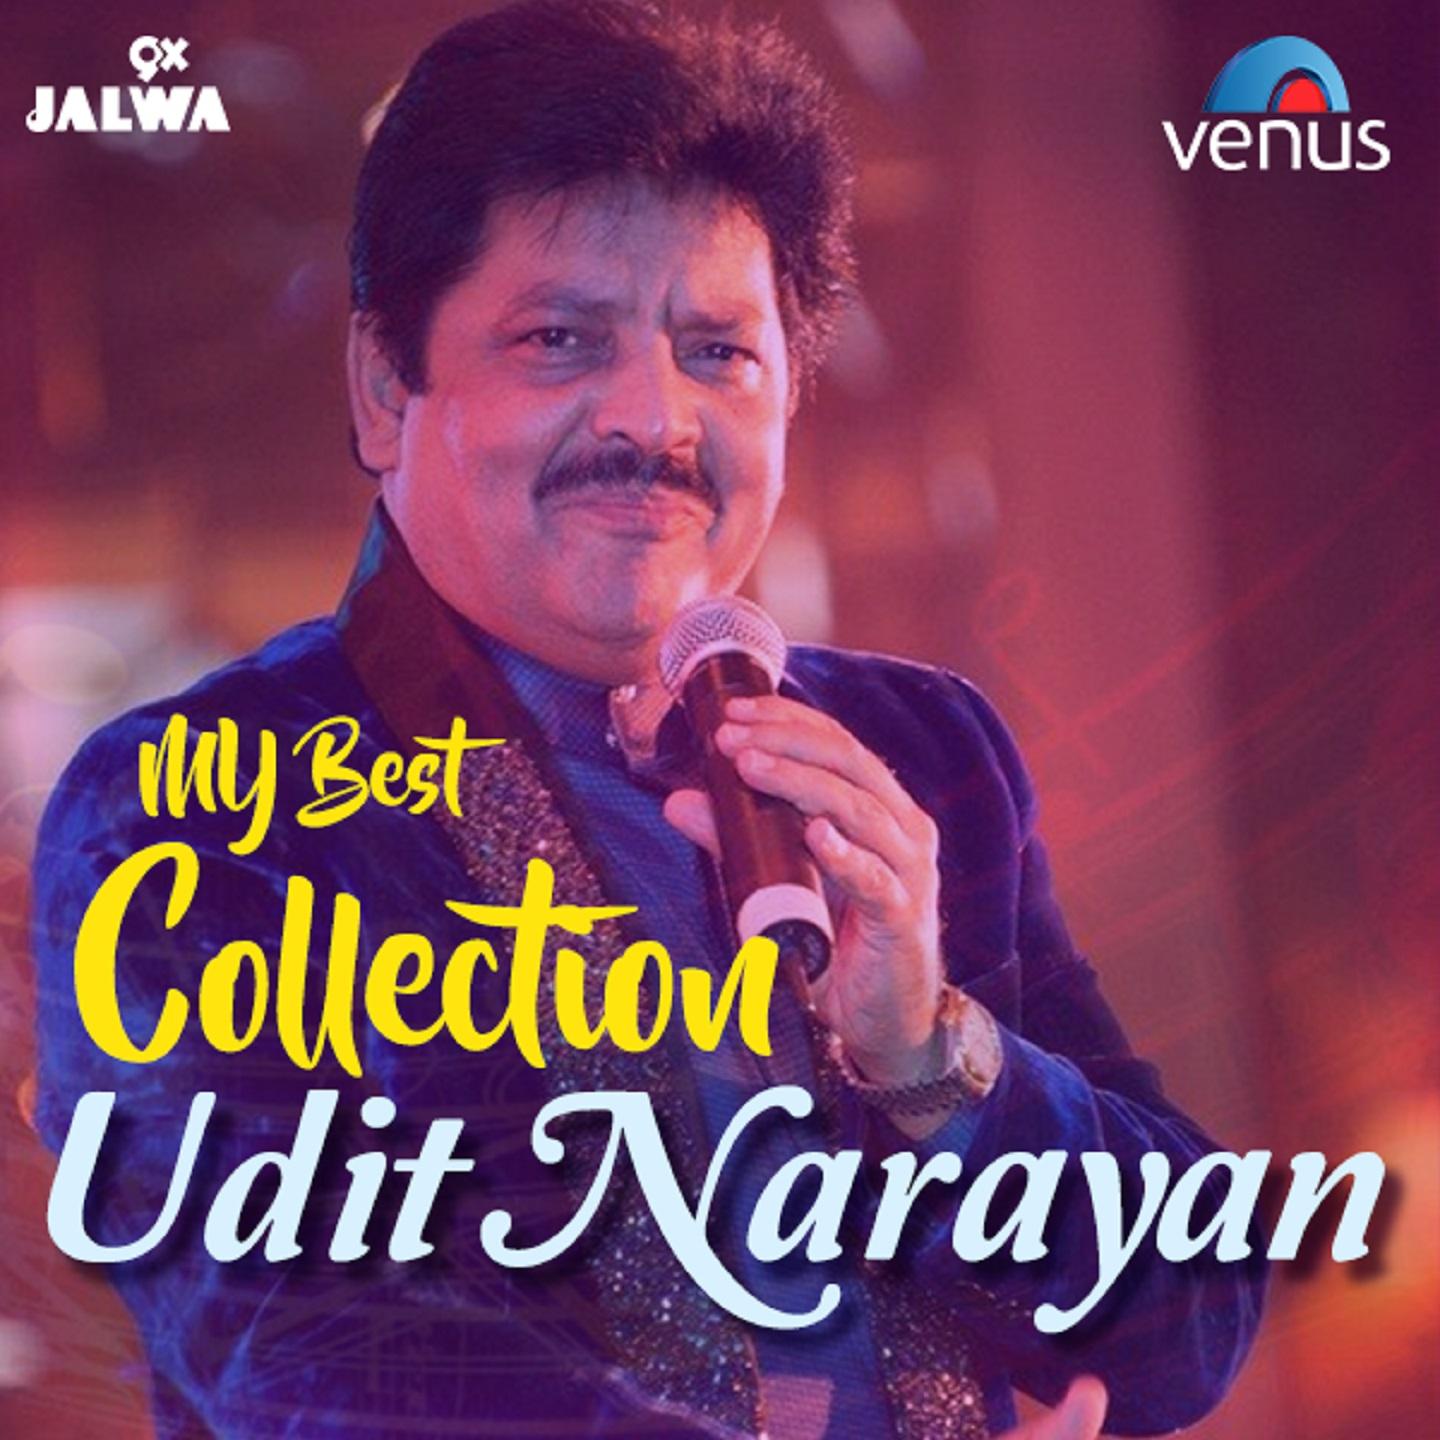 My Best Collection - Udit Narayan专辑